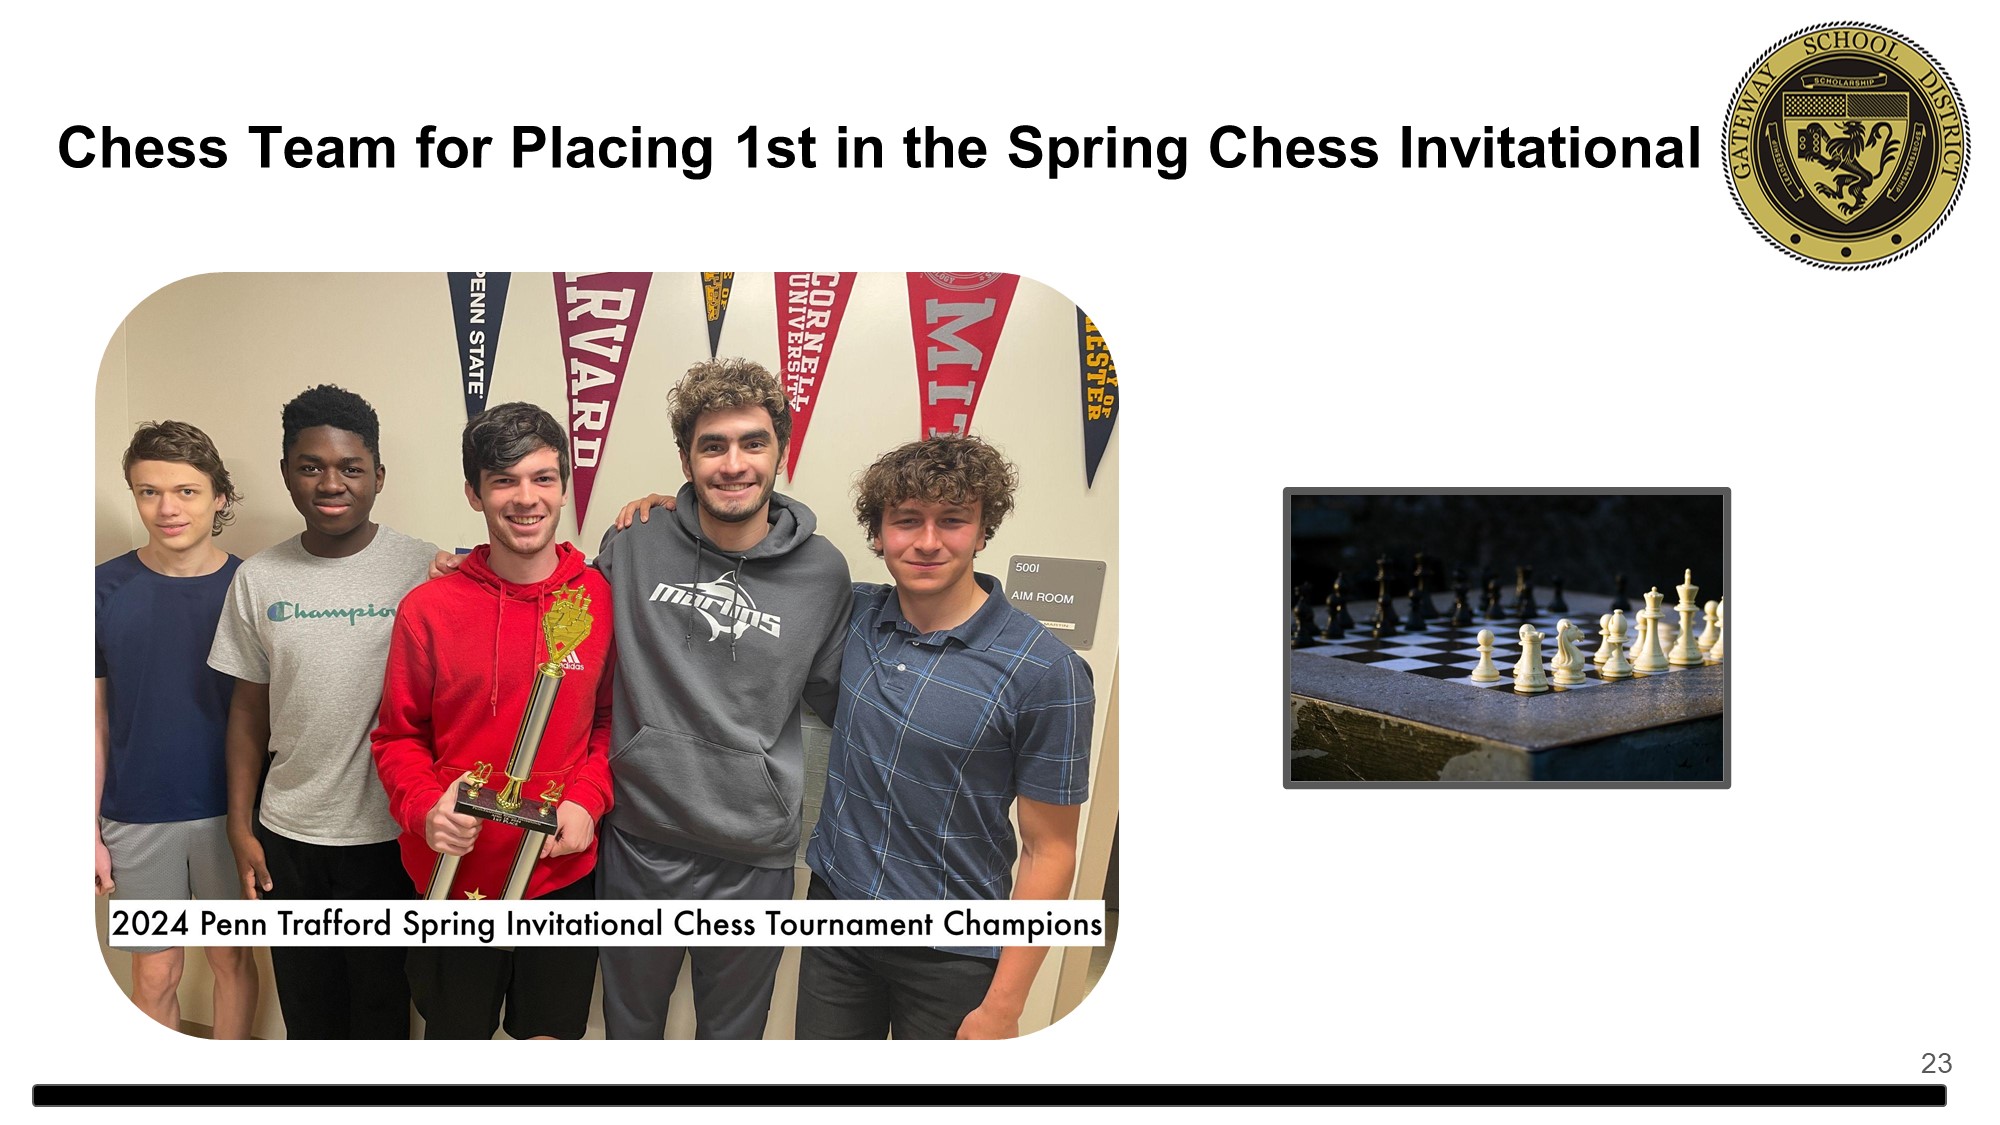 Chess Team for Placing 1st in the Spring Chess Invitational